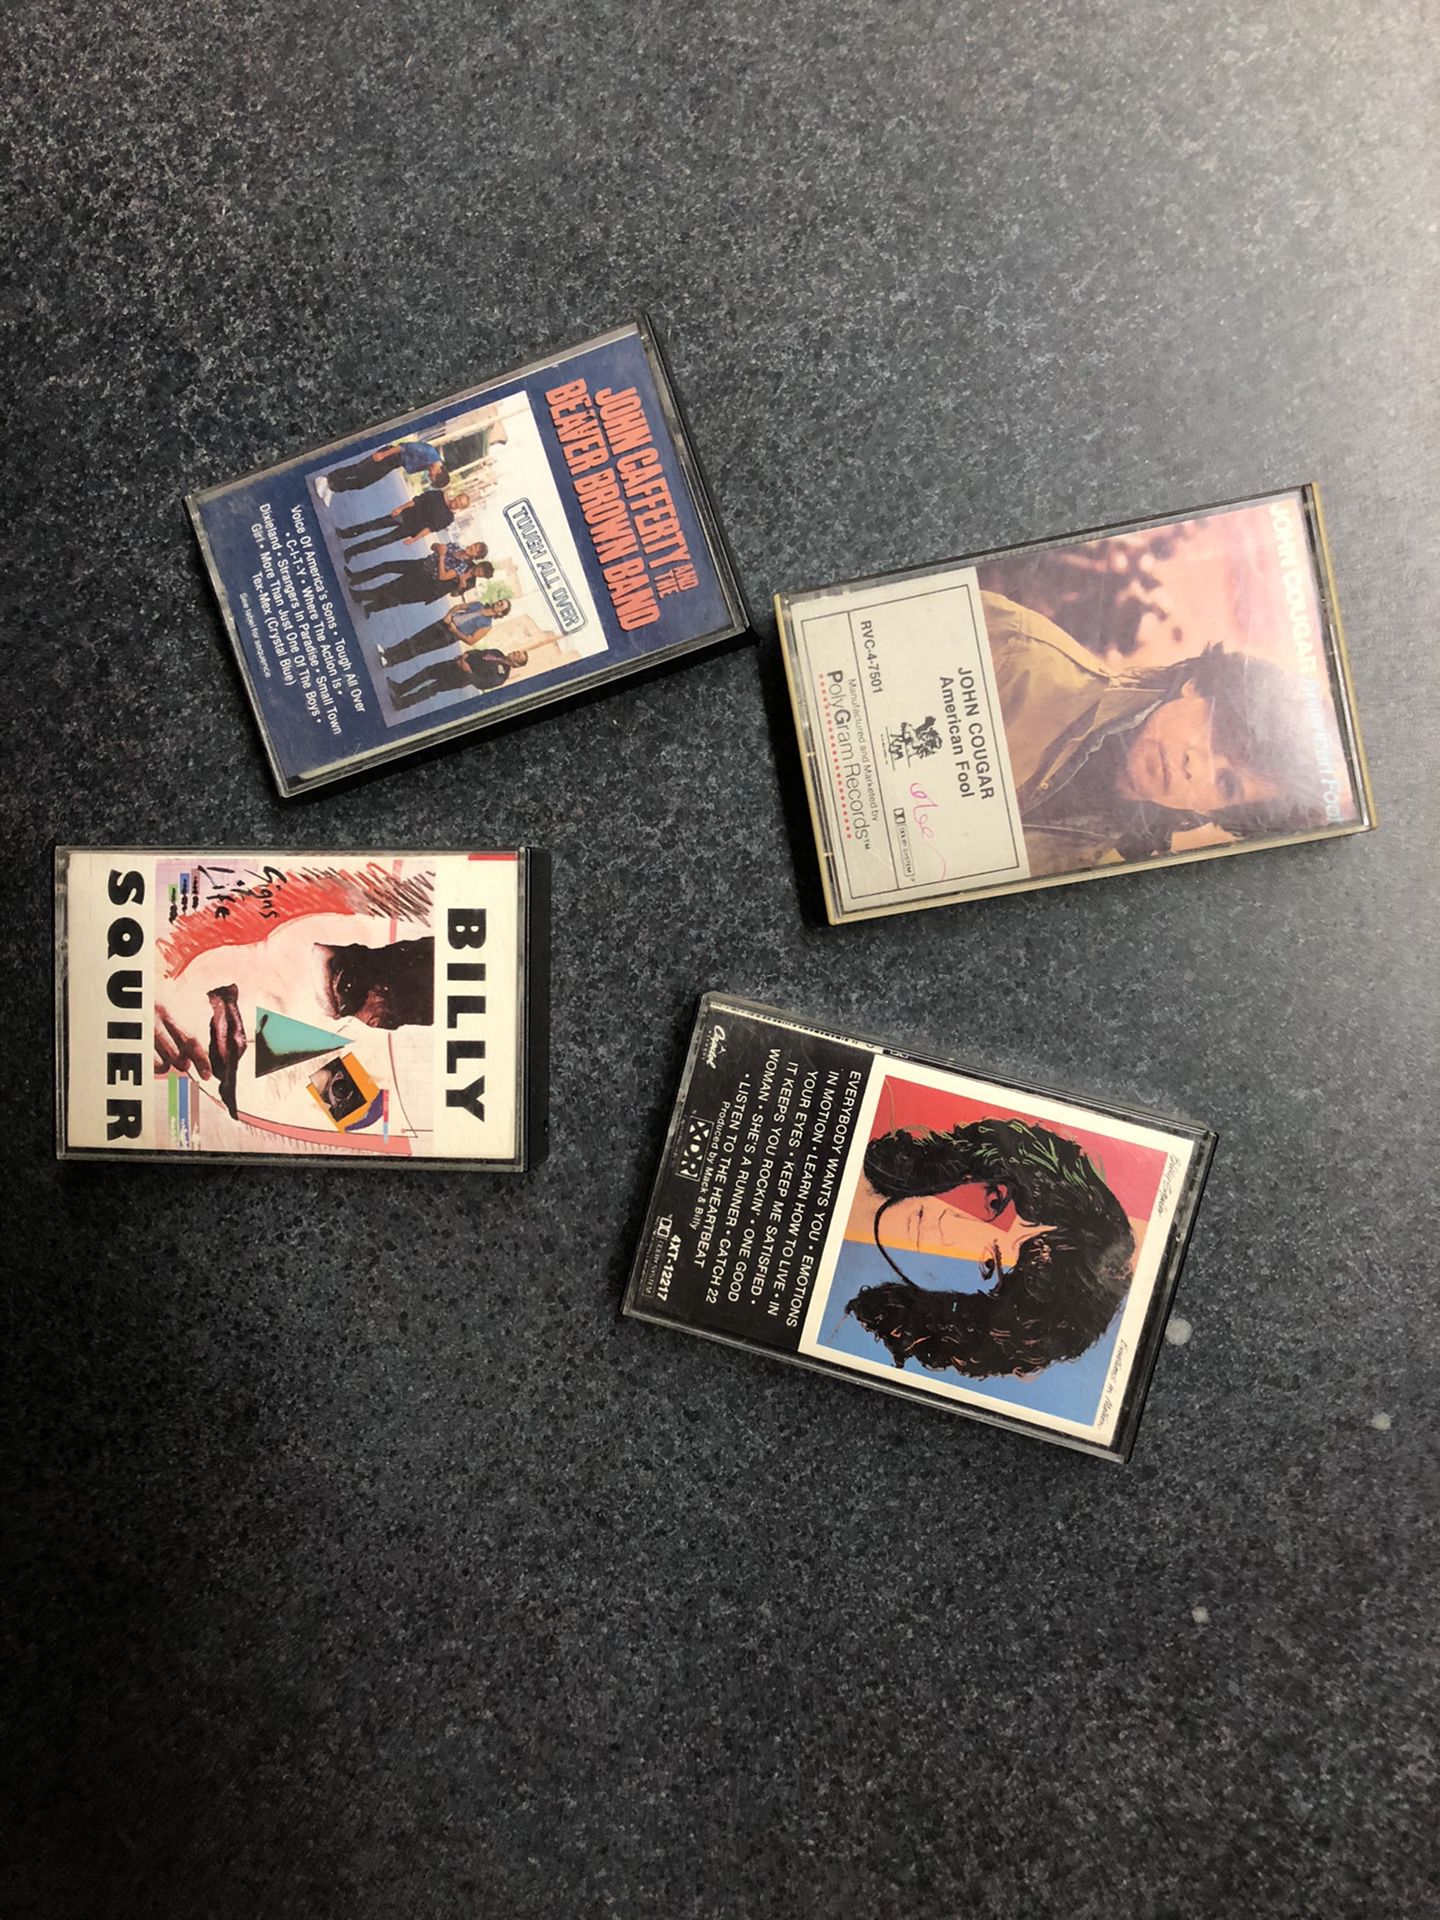 Billy Squier, John Cougar, and John Cafferty Cassettes